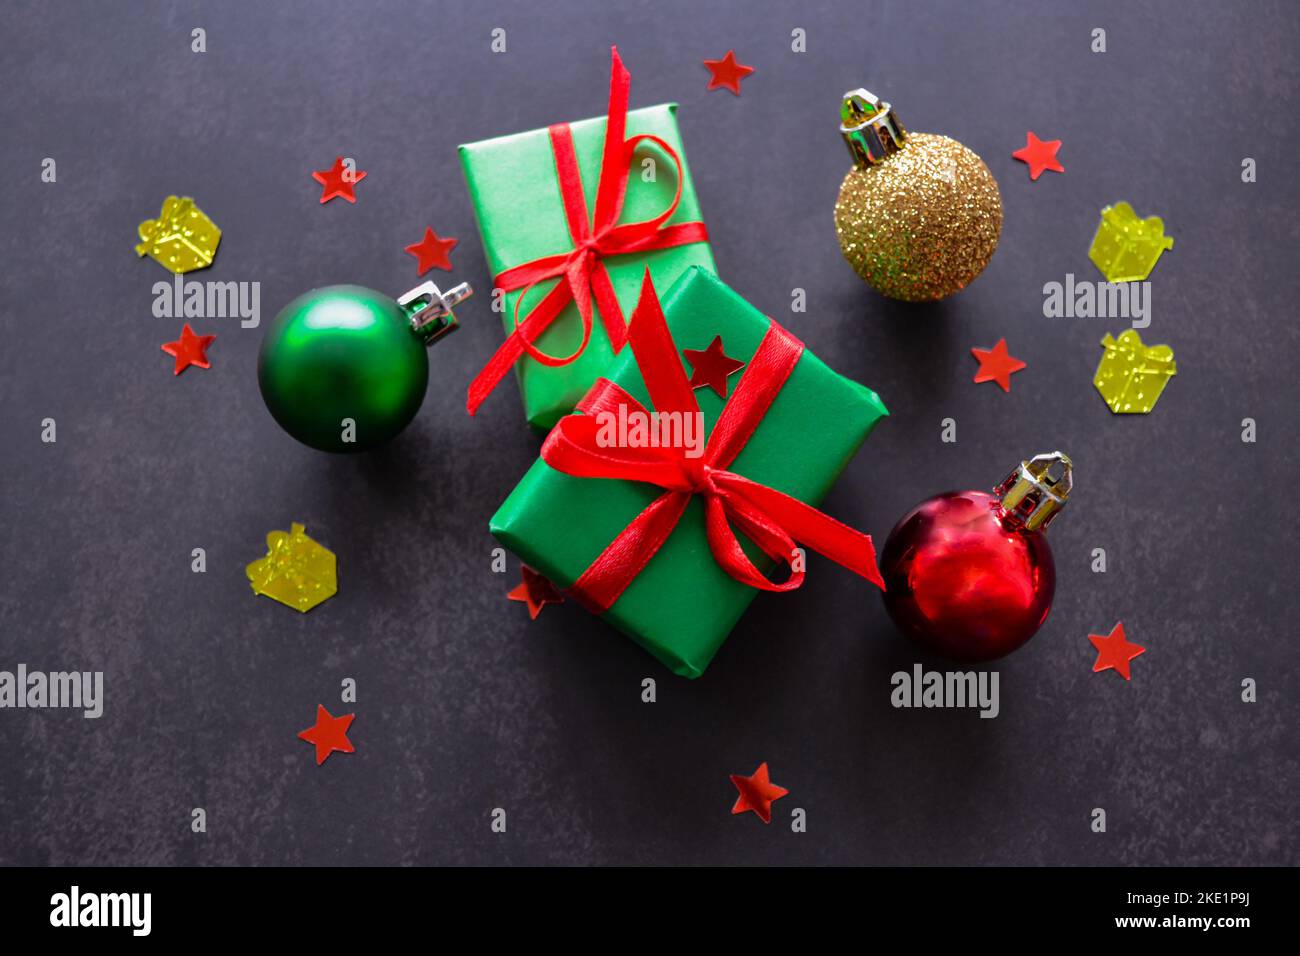 Gifts in green paper with red and yellow ribbons, gold, red and green christmas balls and confetti in the form of red stars. Black background. Big sal Stock Photo